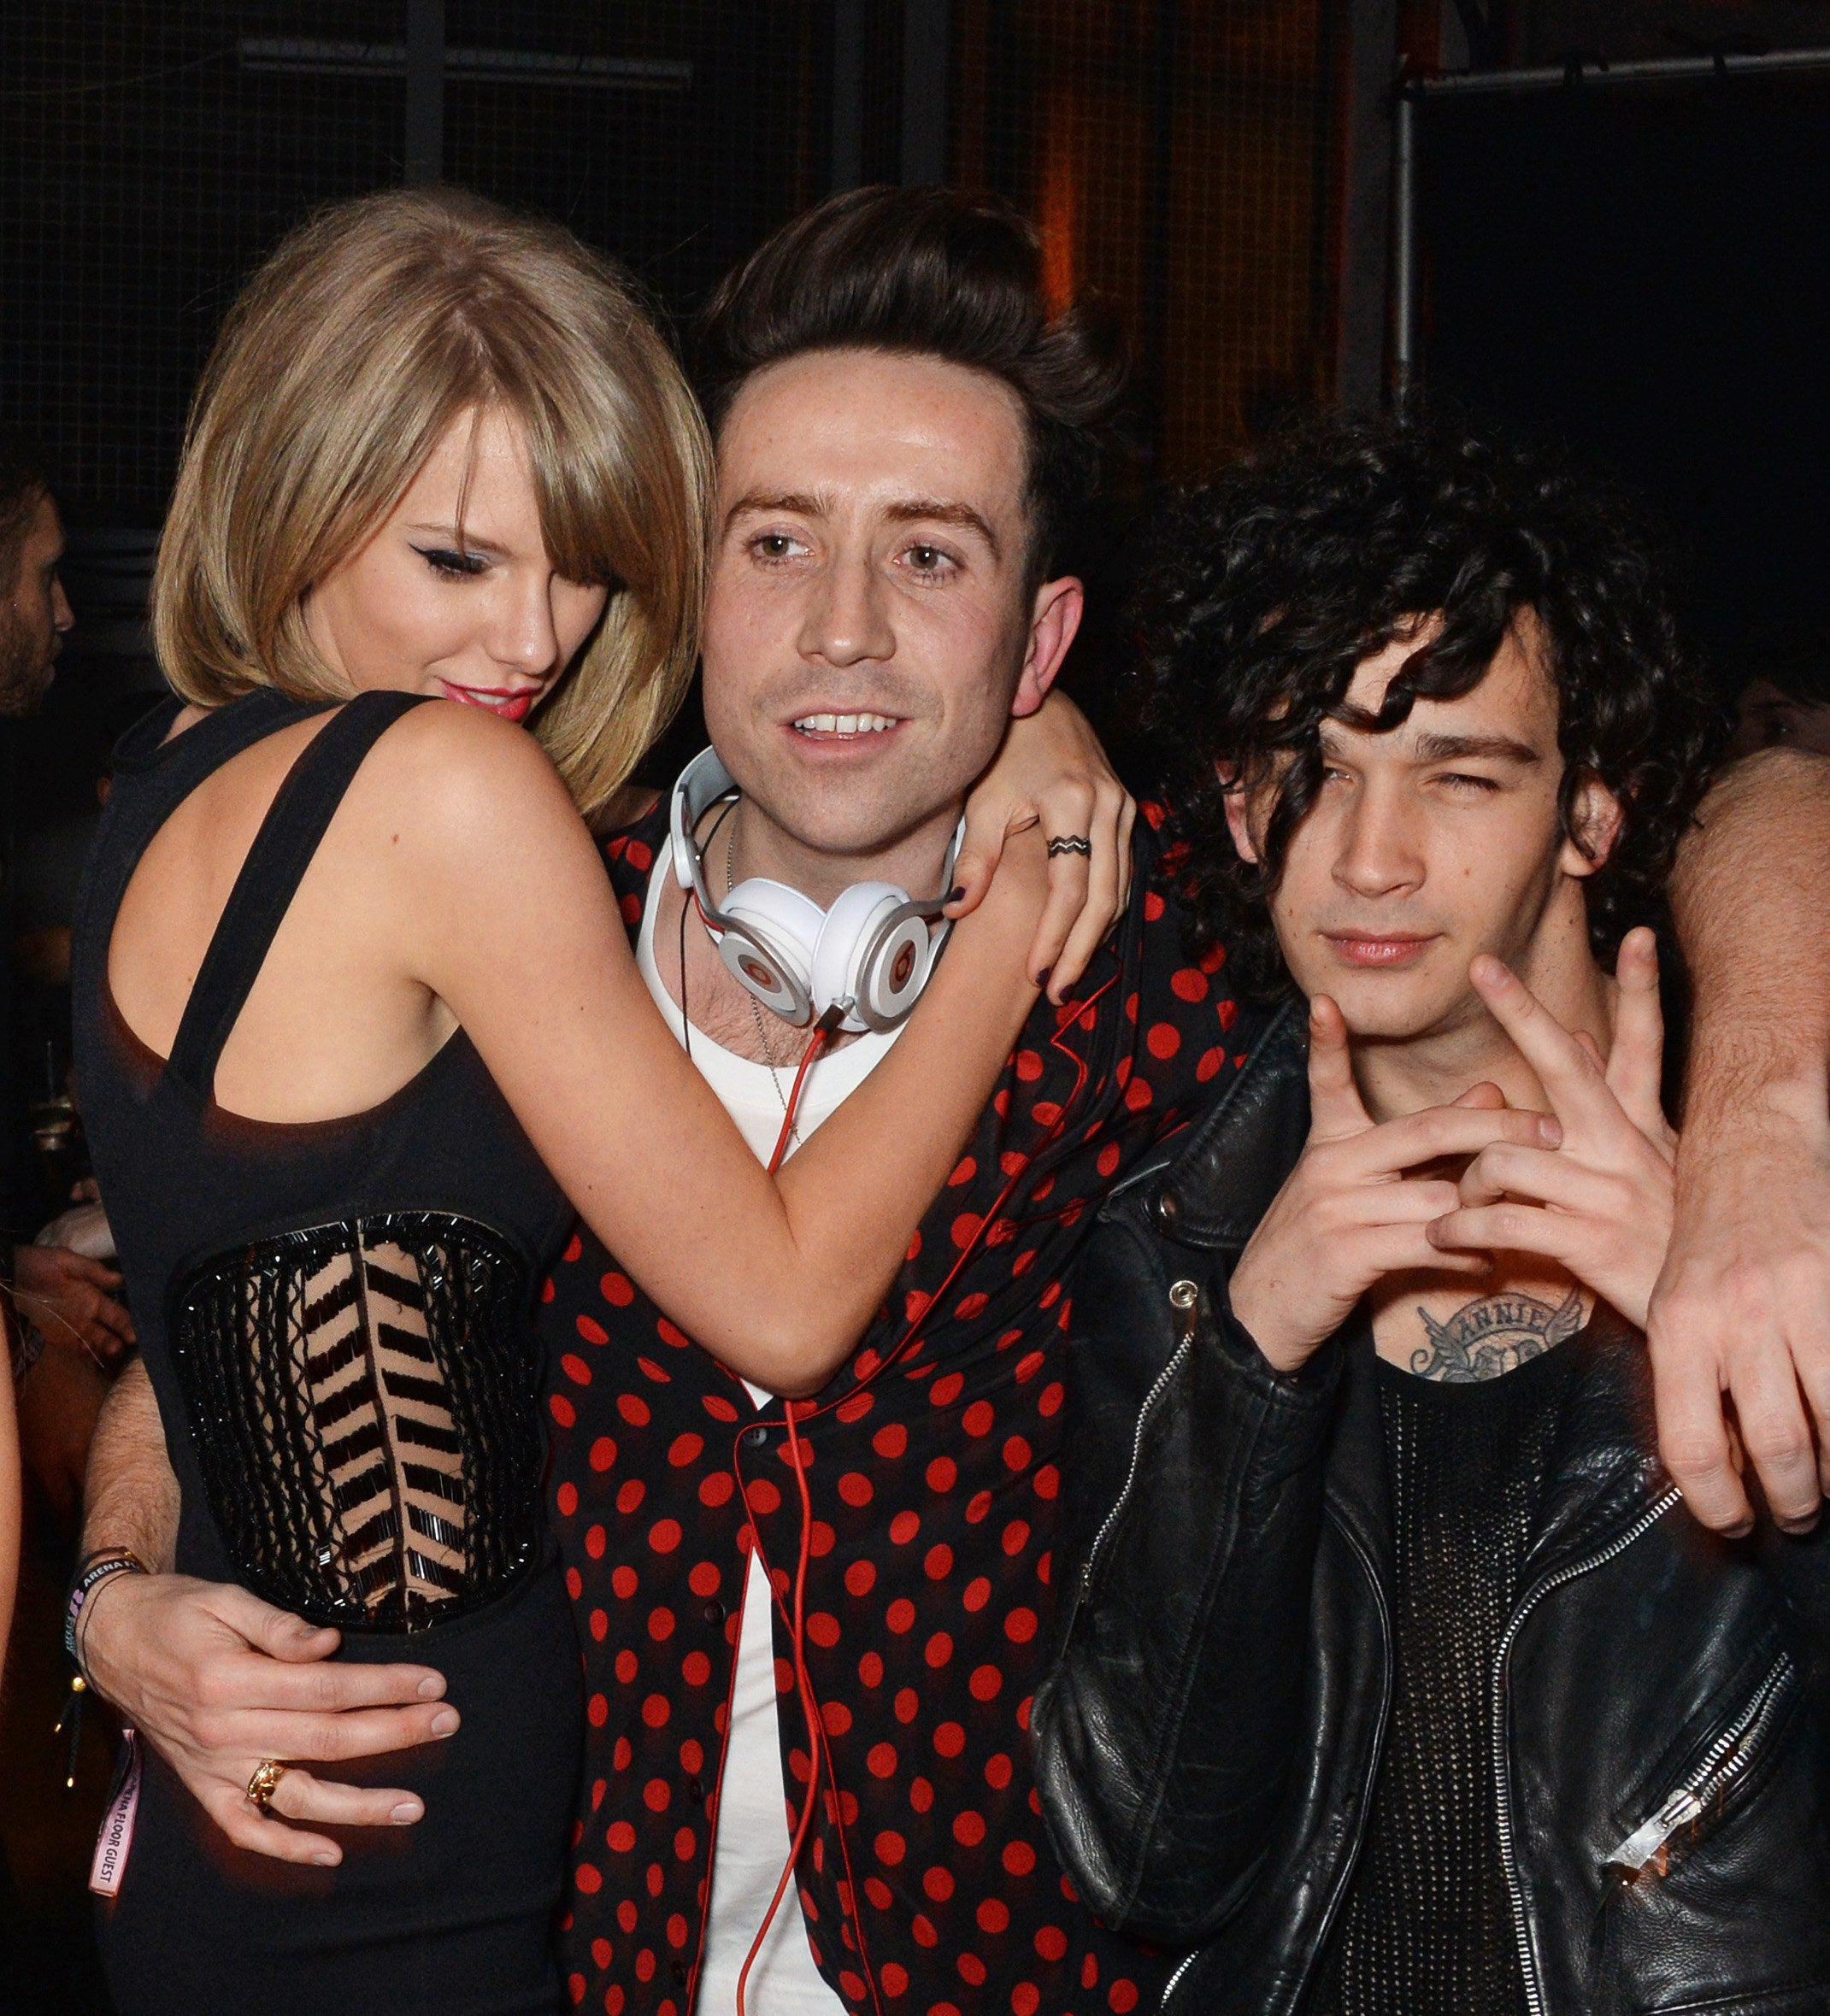 Taylor with Nick Grimshaw and Matty